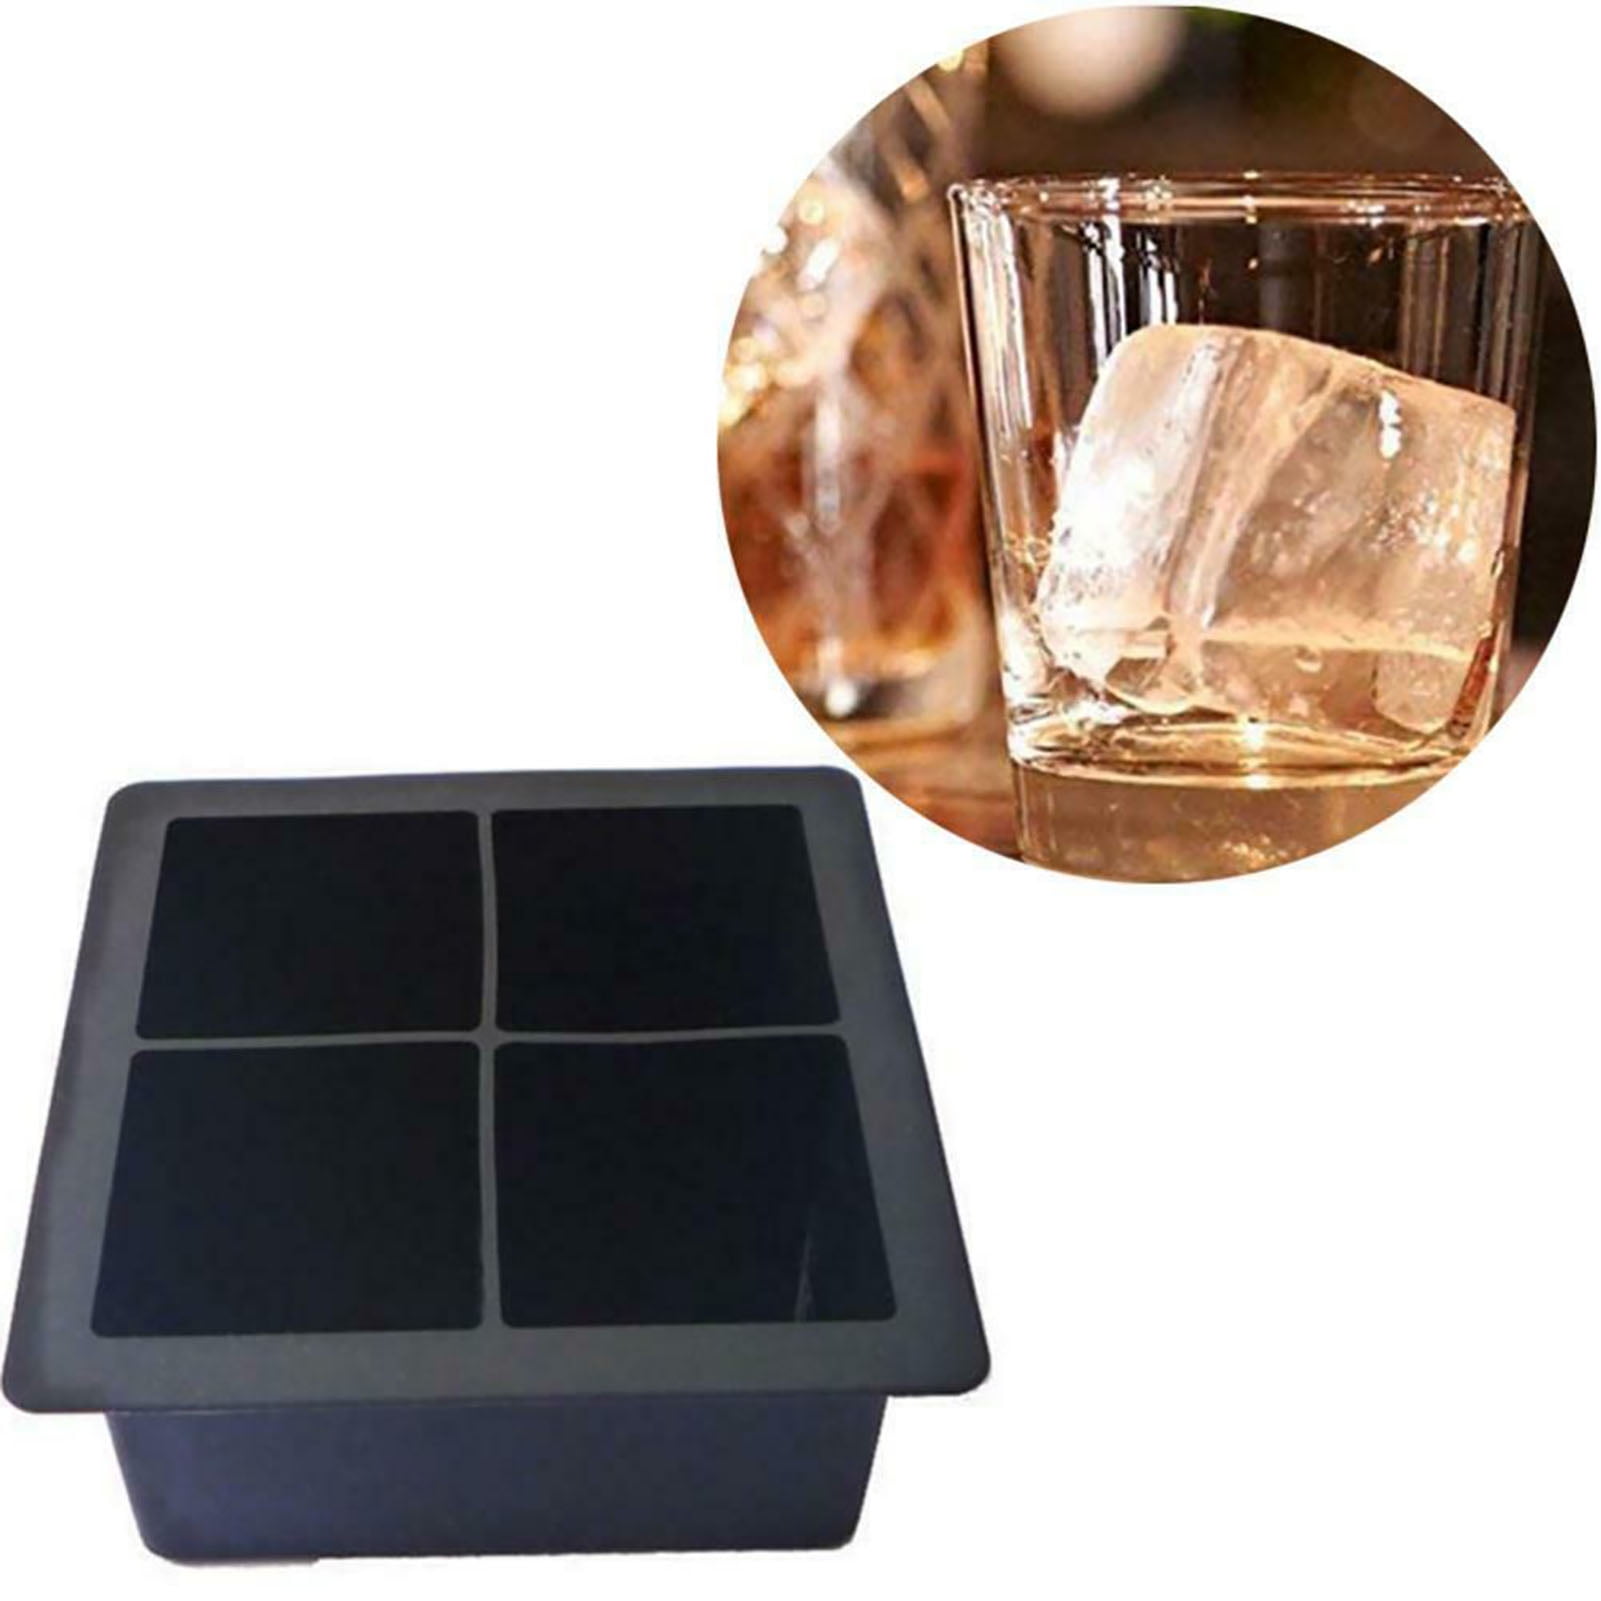 Luxtrada 4/6 Slot Big Block Ice Cube Trays, Silicone Slow Melting Ice Cube Mold Reusable Square Ice Cube Maker for Whiskey Party Bar Cocktails Drink